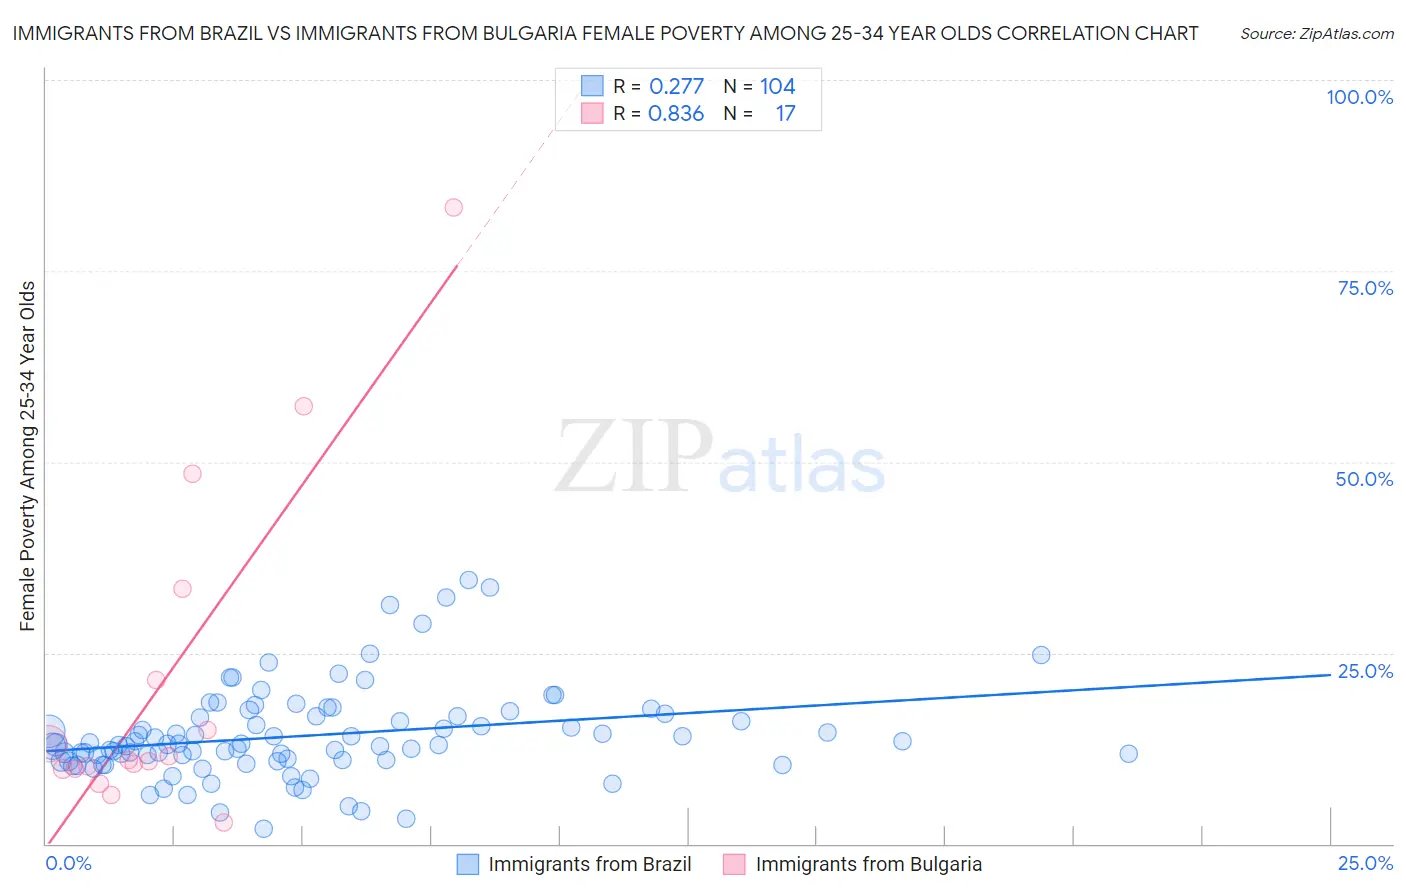 Immigrants from Brazil vs Immigrants from Bulgaria Female Poverty Among 25-34 Year Olds